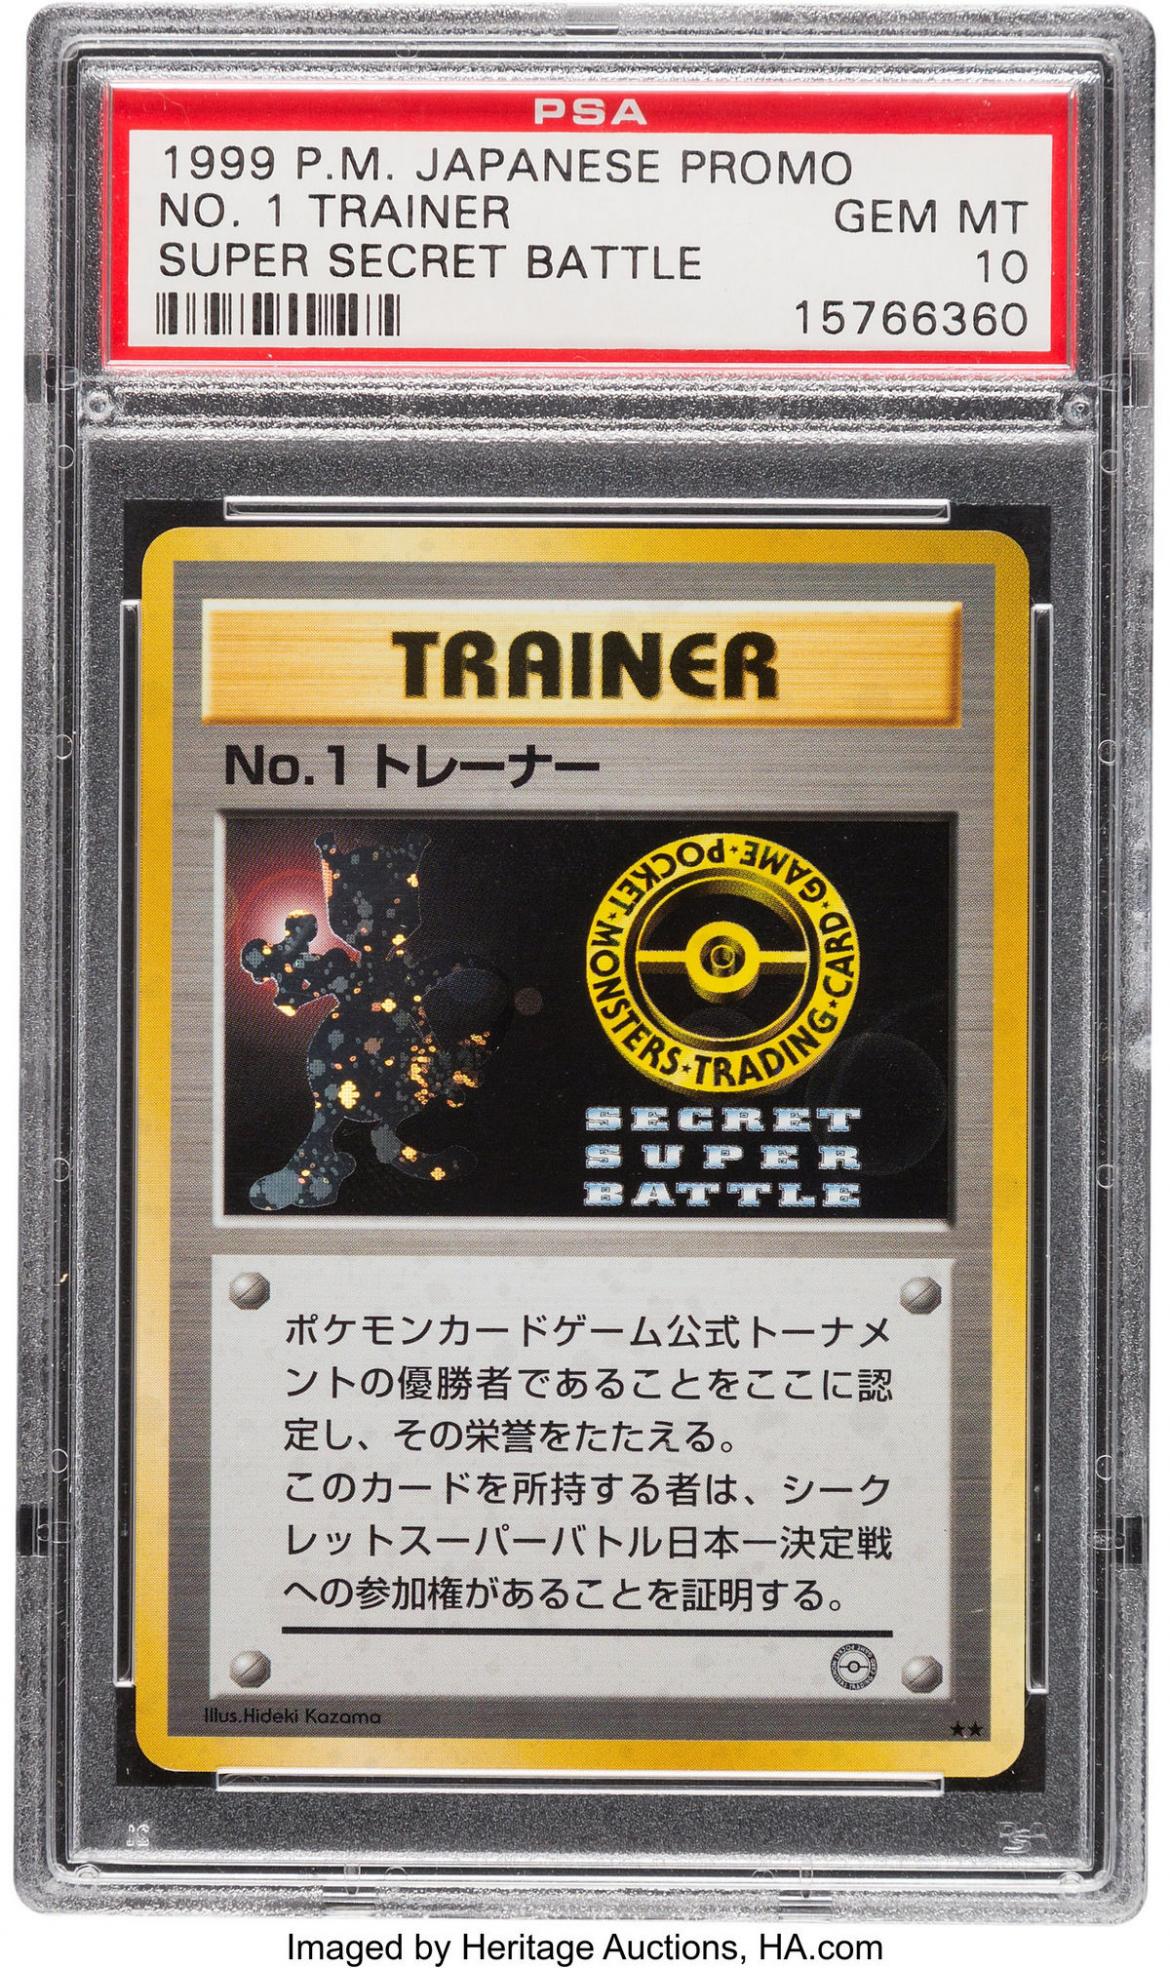 This Extremely Rare Pok mon Trainer Card Is Expected To Sell For 